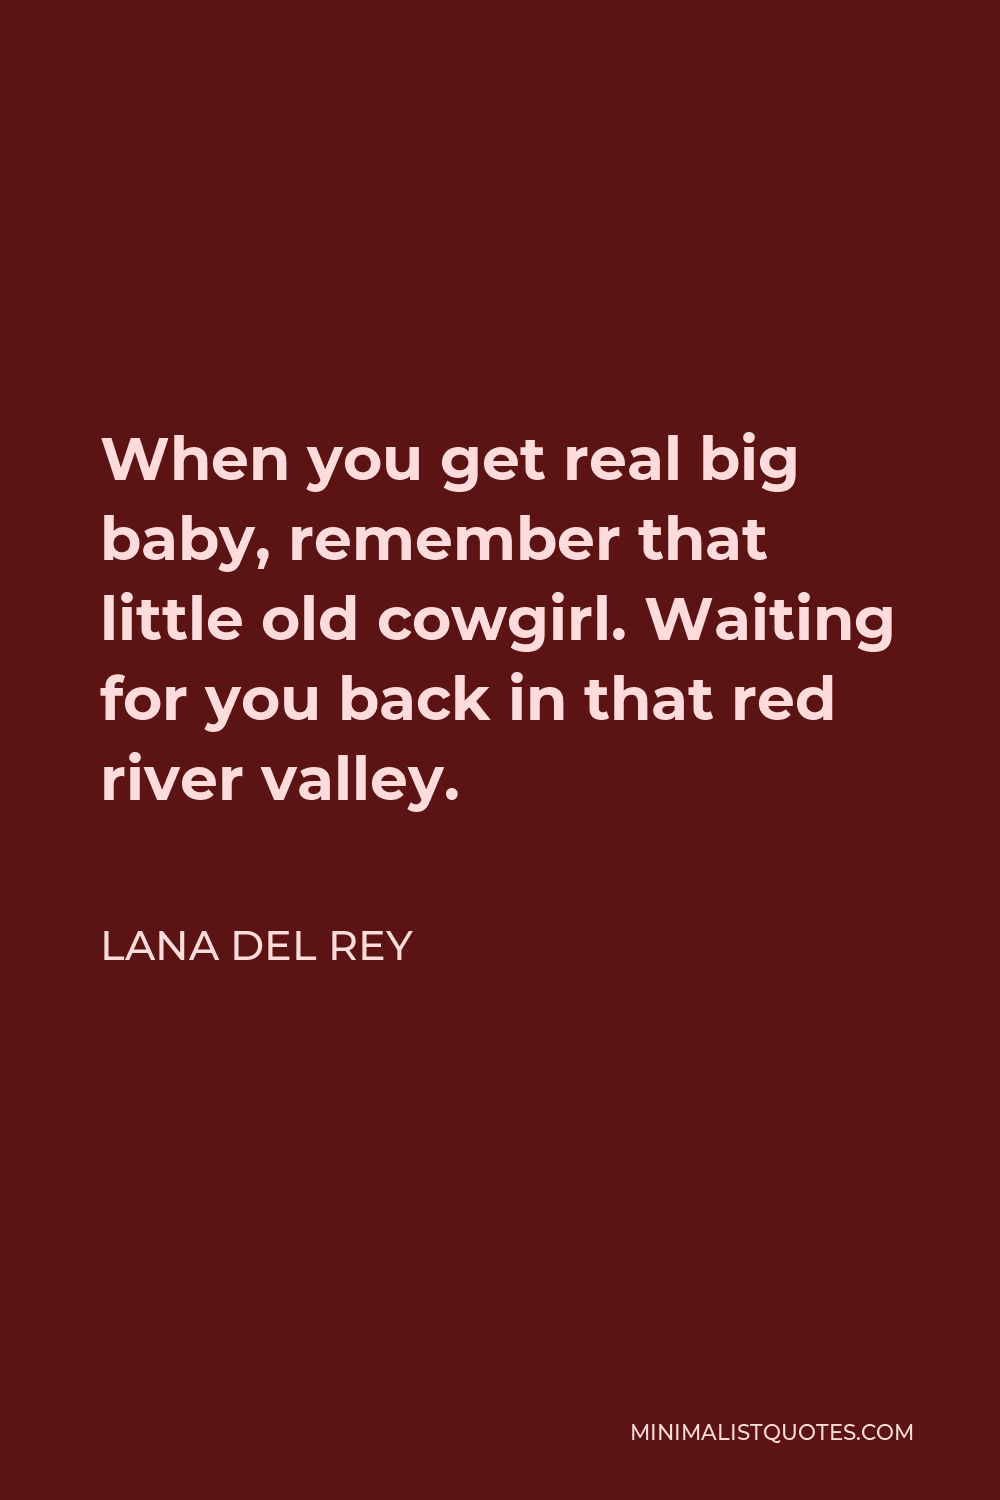 Lana Del Rey Quote - When you get real big baby, remember that little old cowgirl. Waiting for you back in that red river valley.